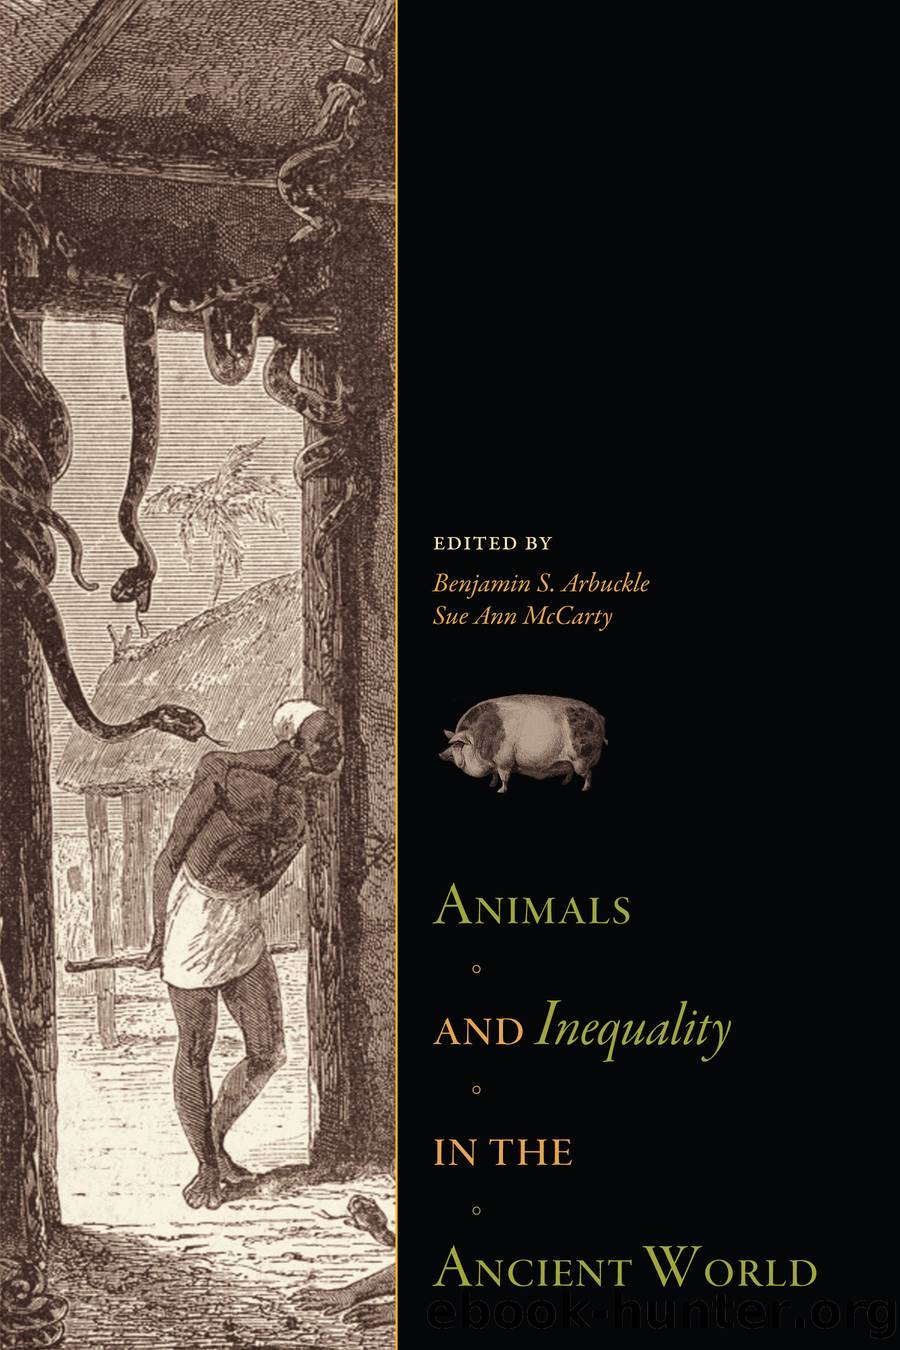 Animals and Inequality in the Ancient World by Benjamin S. Arbuckle & Sue Ann McCarty